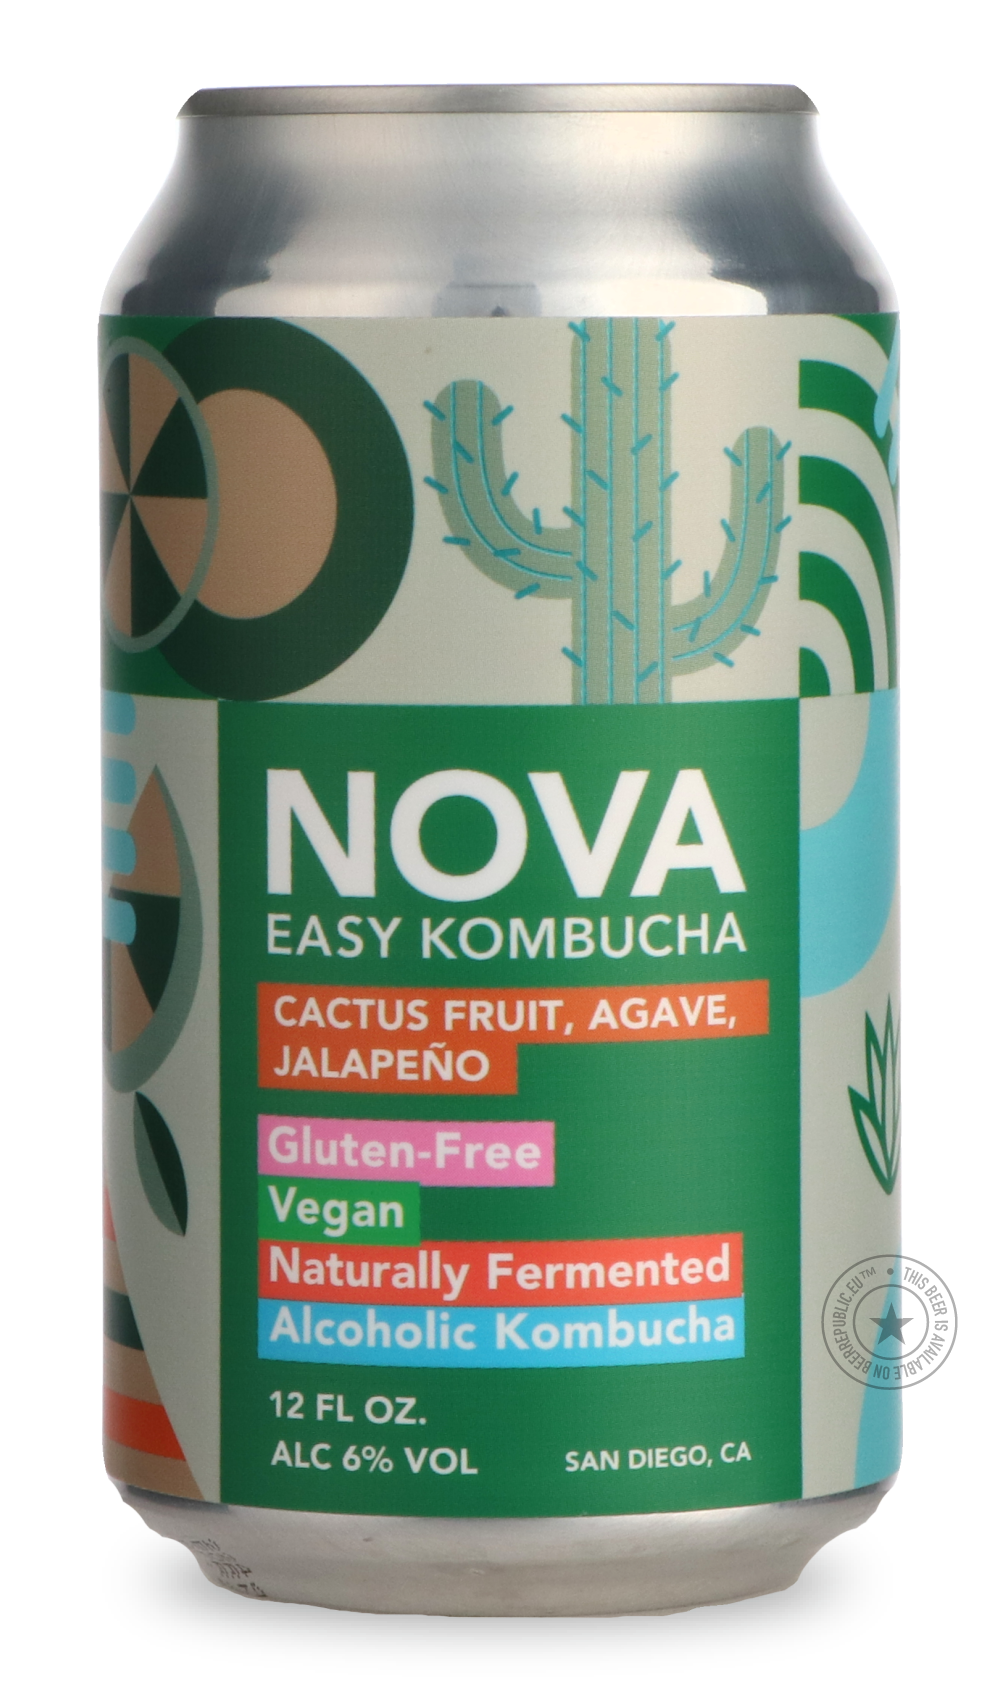 -Novo Brazil- NOVA Kombucha Cactus Fruit, Agave, Jalapeño-Specials- Only @ Beer Republic - The best online beer store for American & Canadian craft beer - Buy beer online from the USA and Canada - Bier online kopen - Amerikaans bier kopen - Craft beer store - Craft beer kopen - Amerikanisch bier kaufen - Bier online kaufen - Acheter biere online - IPA - Stout - Porter - New England IPA - Hazy IPA - Imperial Stout - Barrel Aged - Barrel Aged Imperial Stout - Brown - Dark beer - Blond - Blonde - Pilsner - Lag